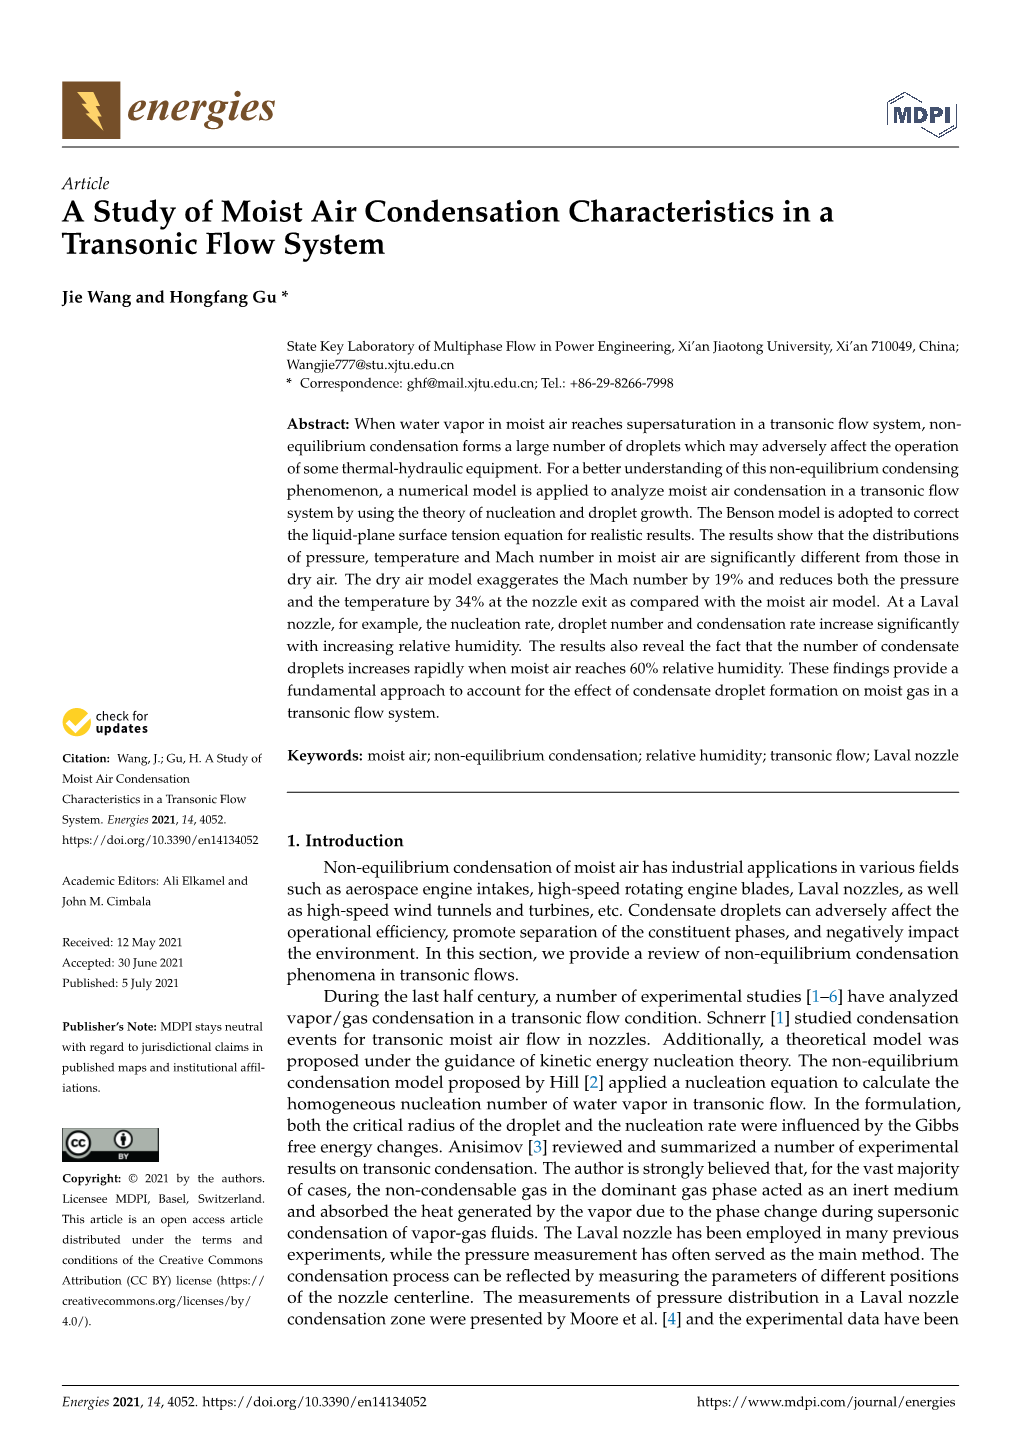 A Study of Moist Air Condensation Characteristics in a Transonic Flow System